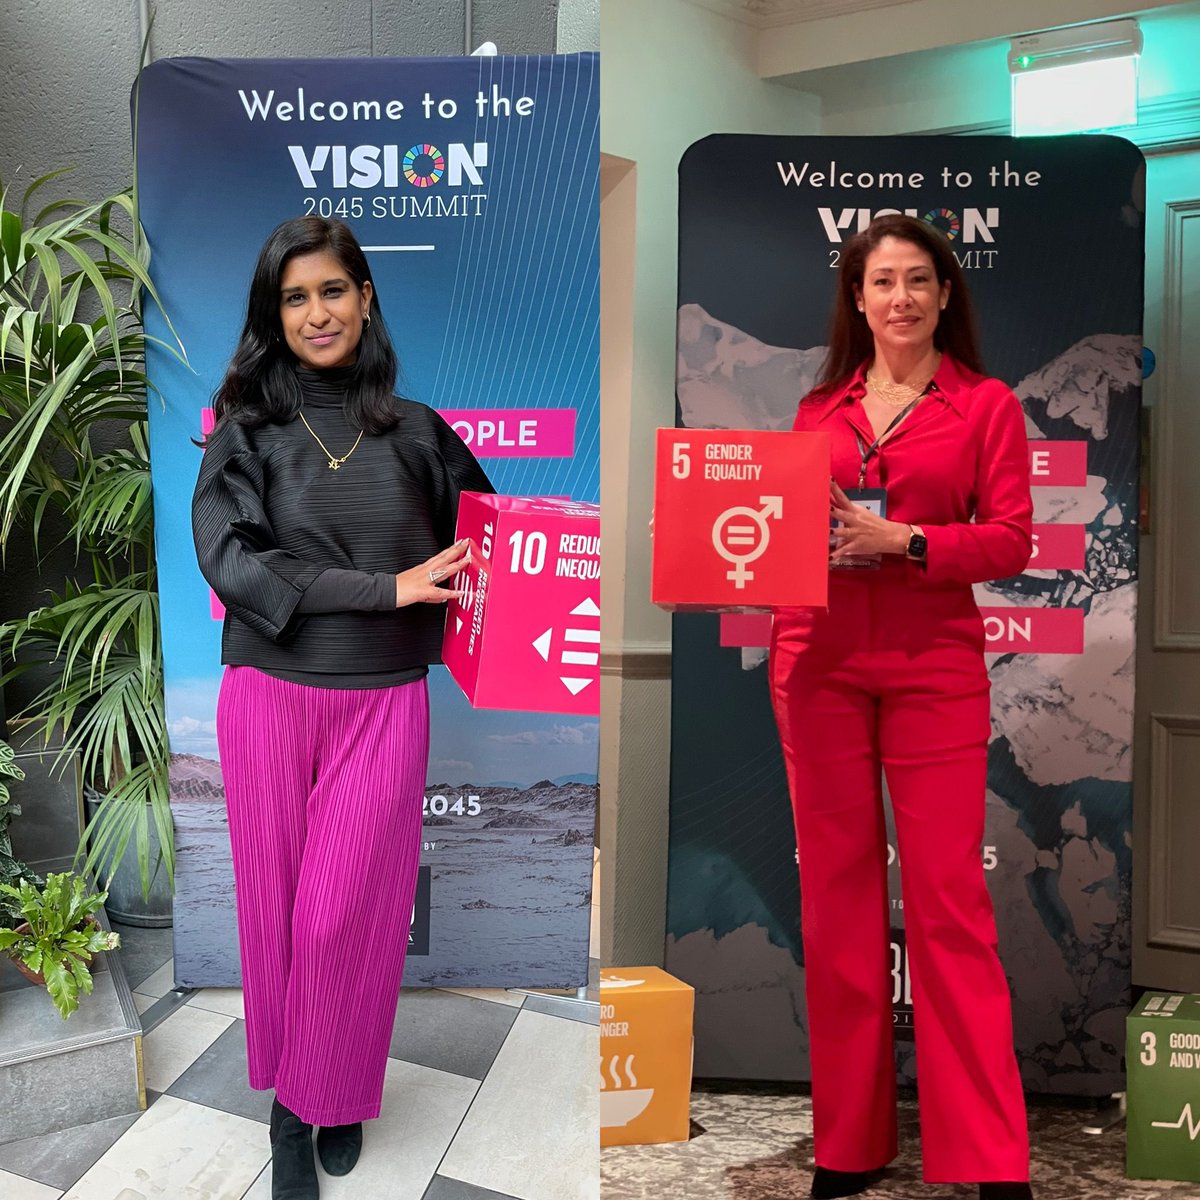 Take the hint! WWG is here to be heard. Our Founder and CEO @Manjula_Lee and our Business Development Director @GiovannaJagger are at the #Vision2045 Summit. #SDGs #ReducedInequalities #GenderEquality #femaleleaders #COP26